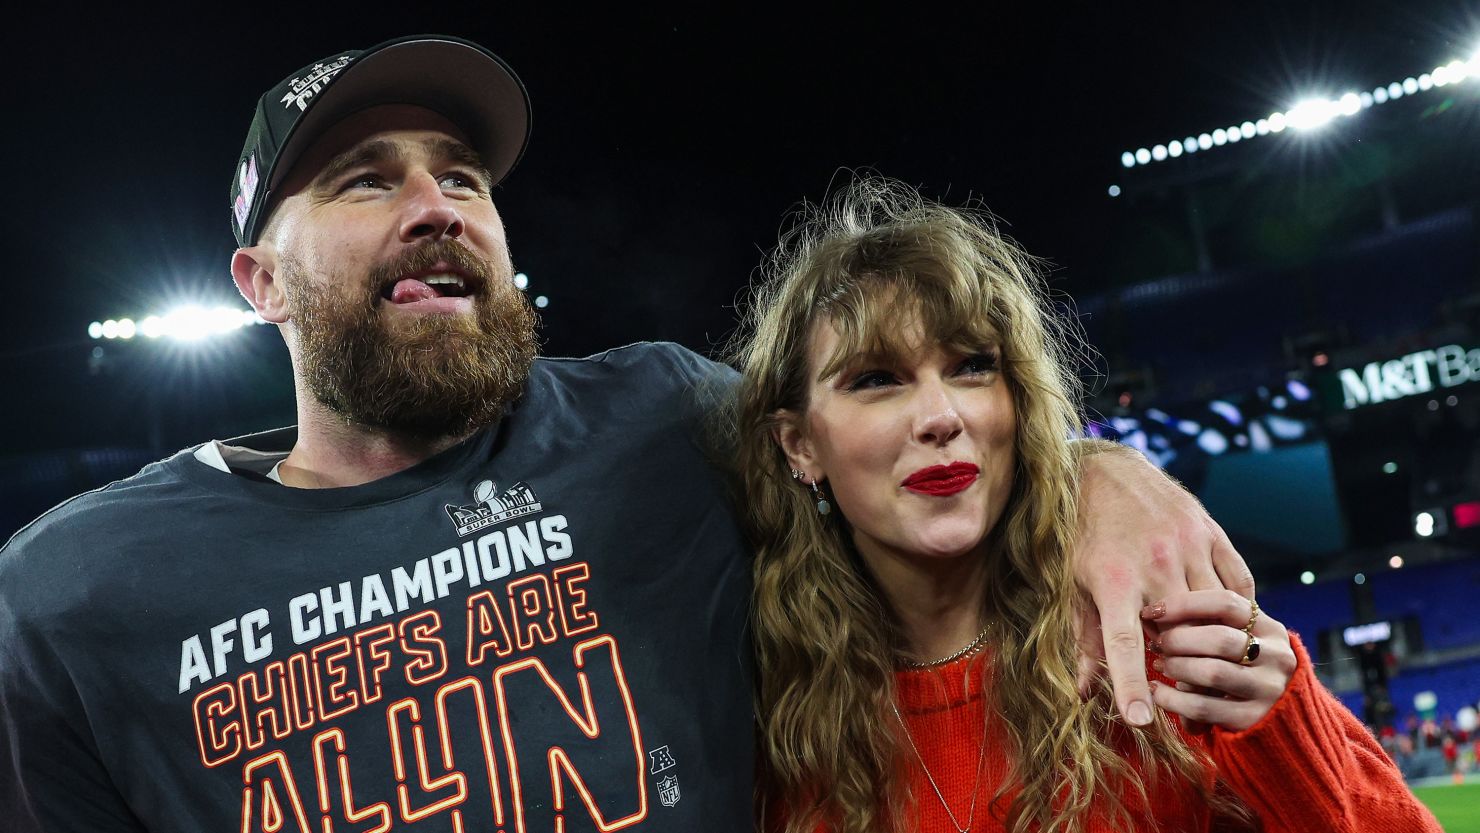 Kansas City Chiefs tight end Travis Kelce celebrates with Taylor Swift after his team defeated the Baltimore Ravens in the AFC championship game on January 28.